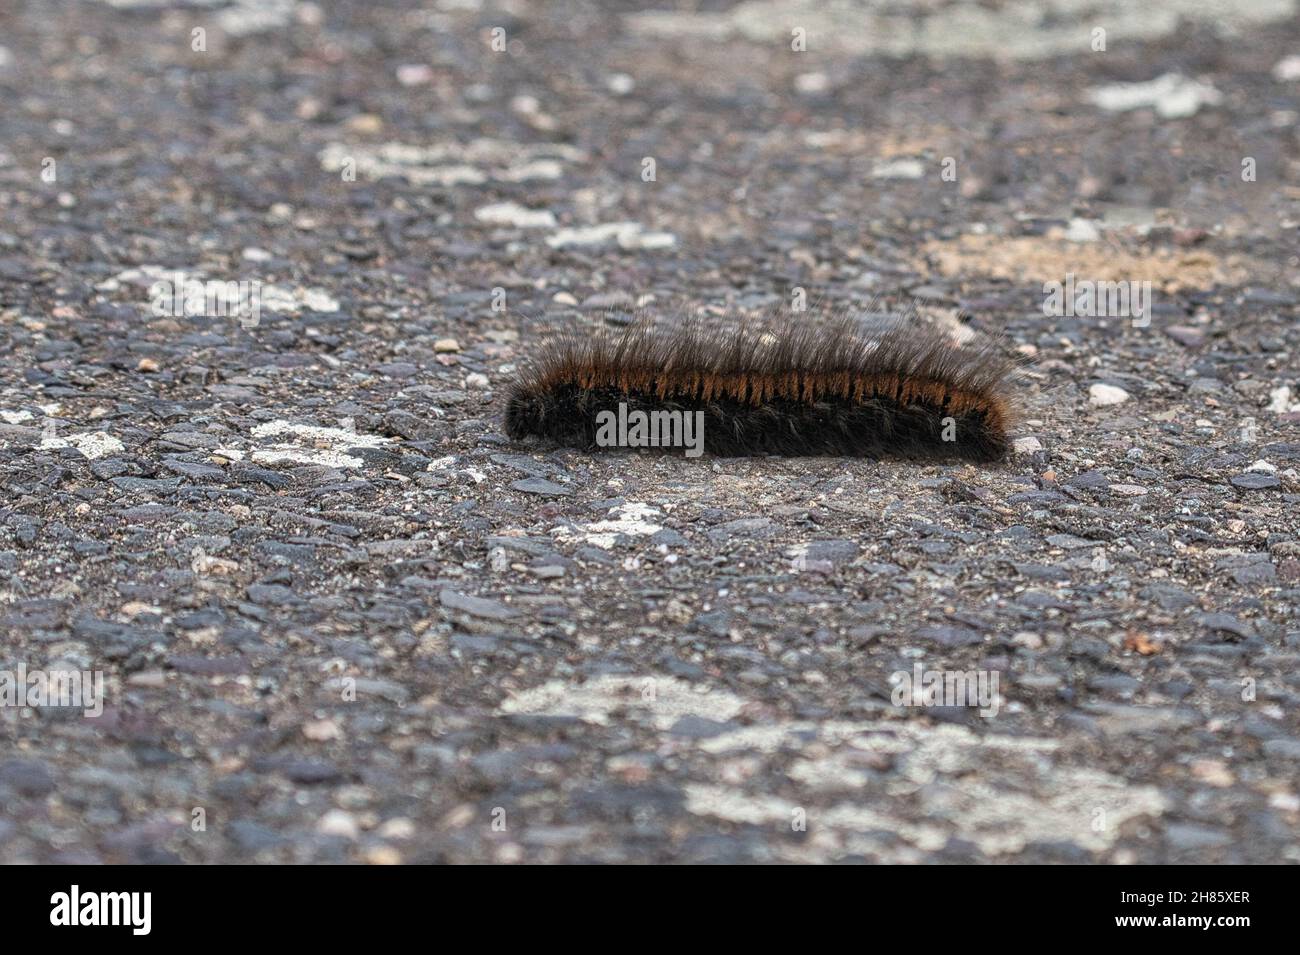 Caterpillar feeding on a leaf. a single animal close up. When they occur in large numbers, they are very harmful. Stock Photo